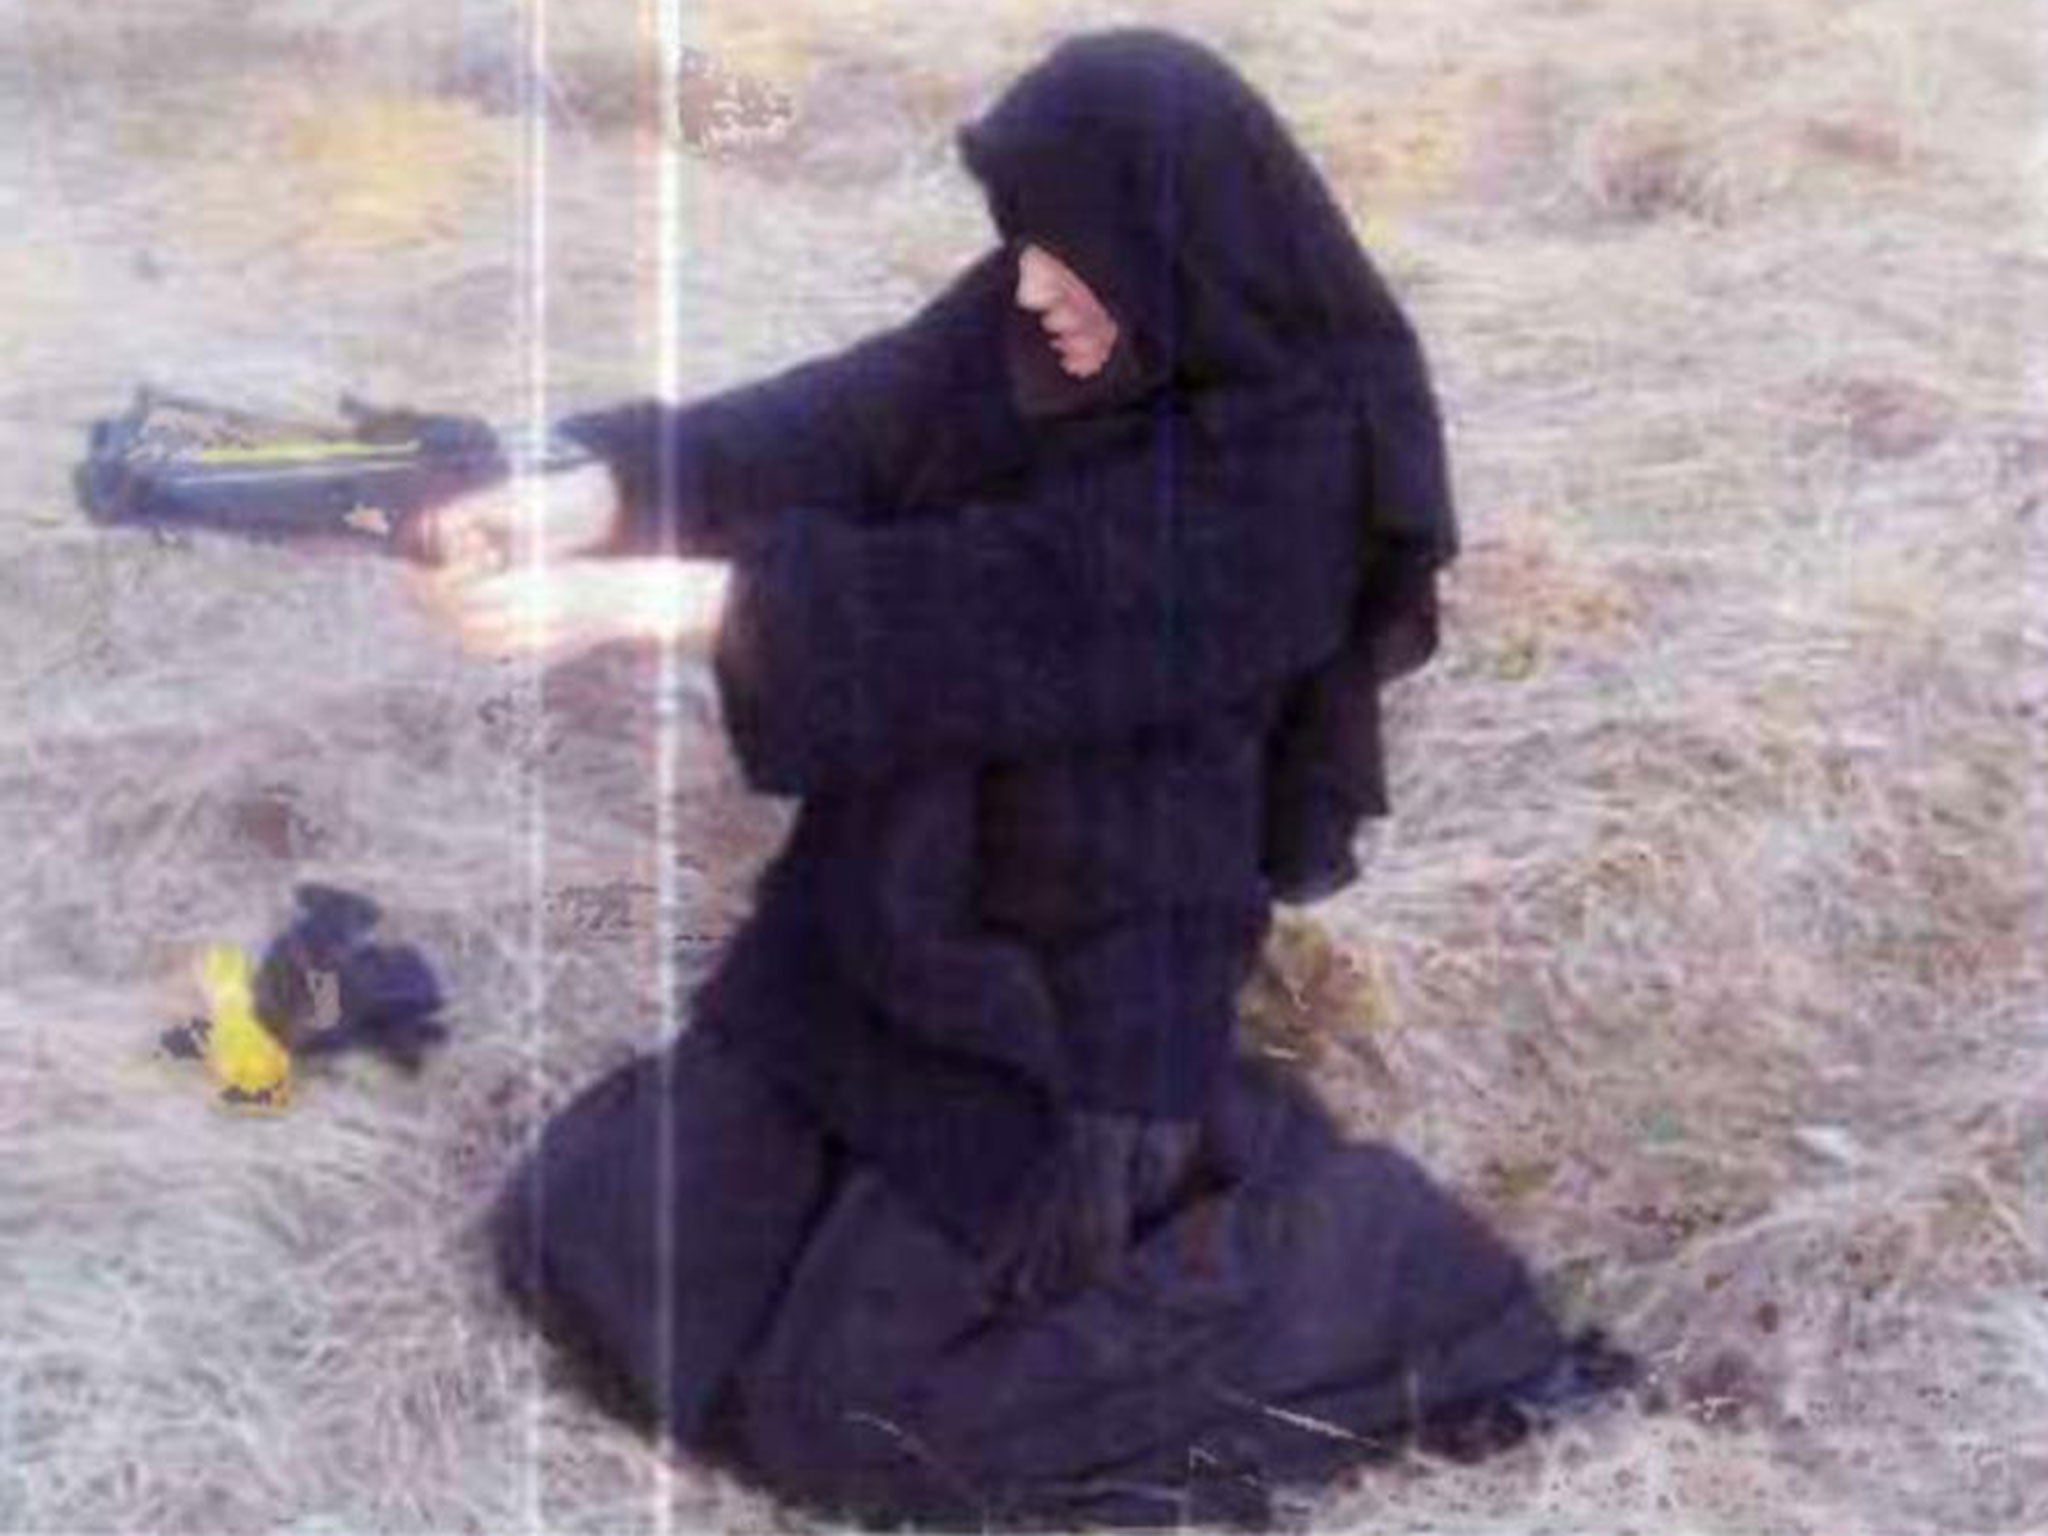 Hayat Boumeddiene in 2010 while she claimed to have crossbow training with Amedy Coulibaly